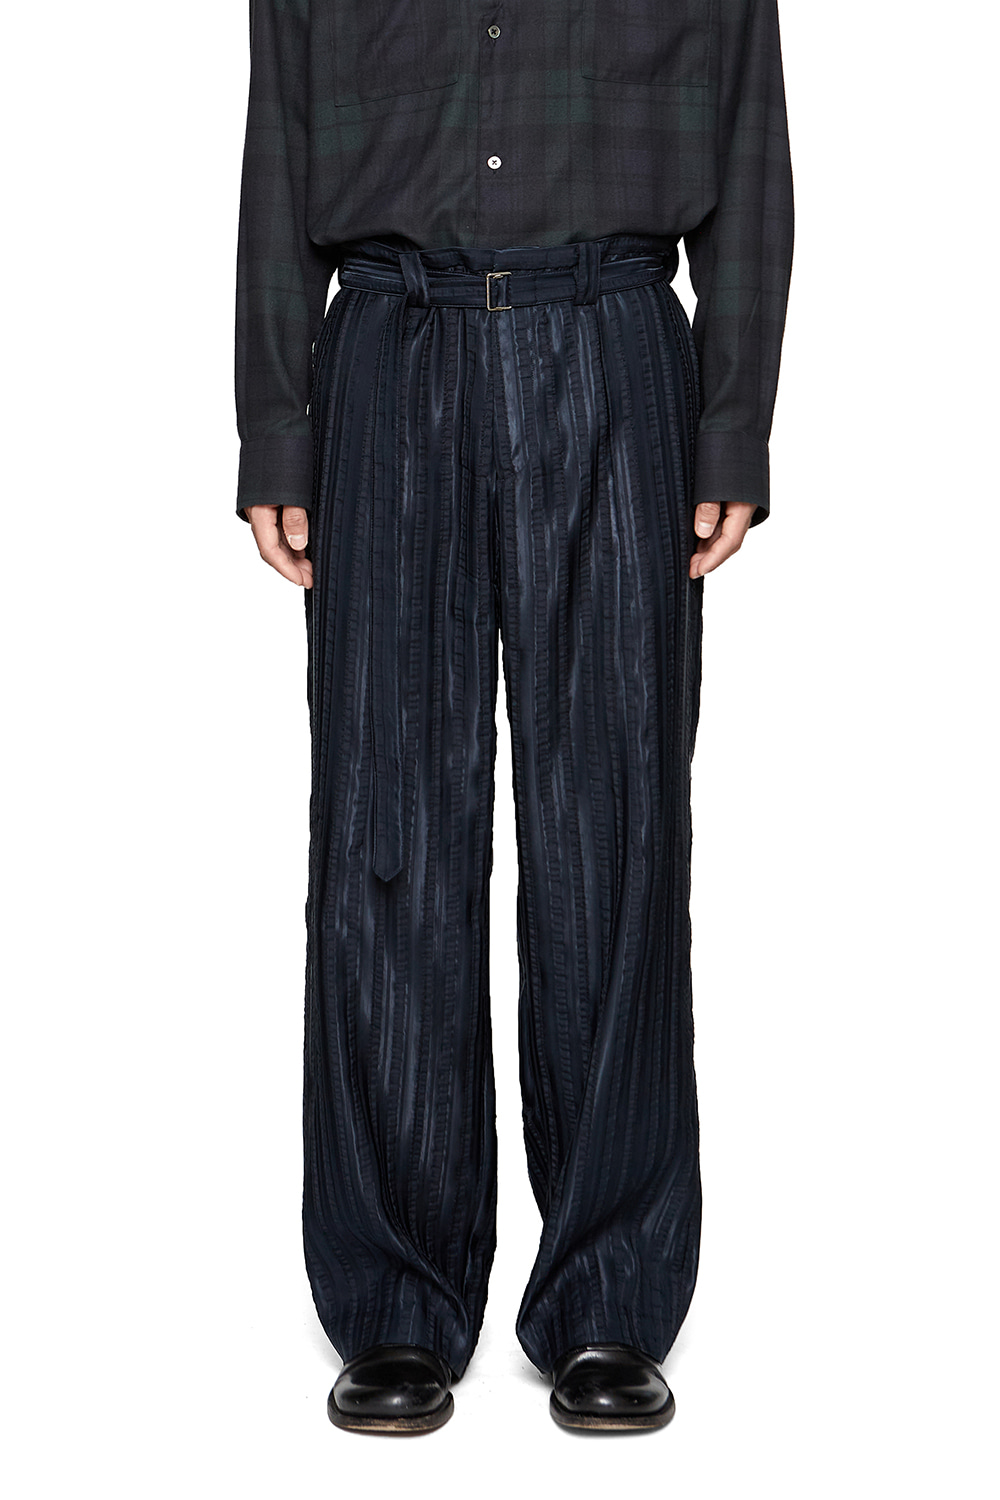 Darted Trousers Jacquard Stripe Navy